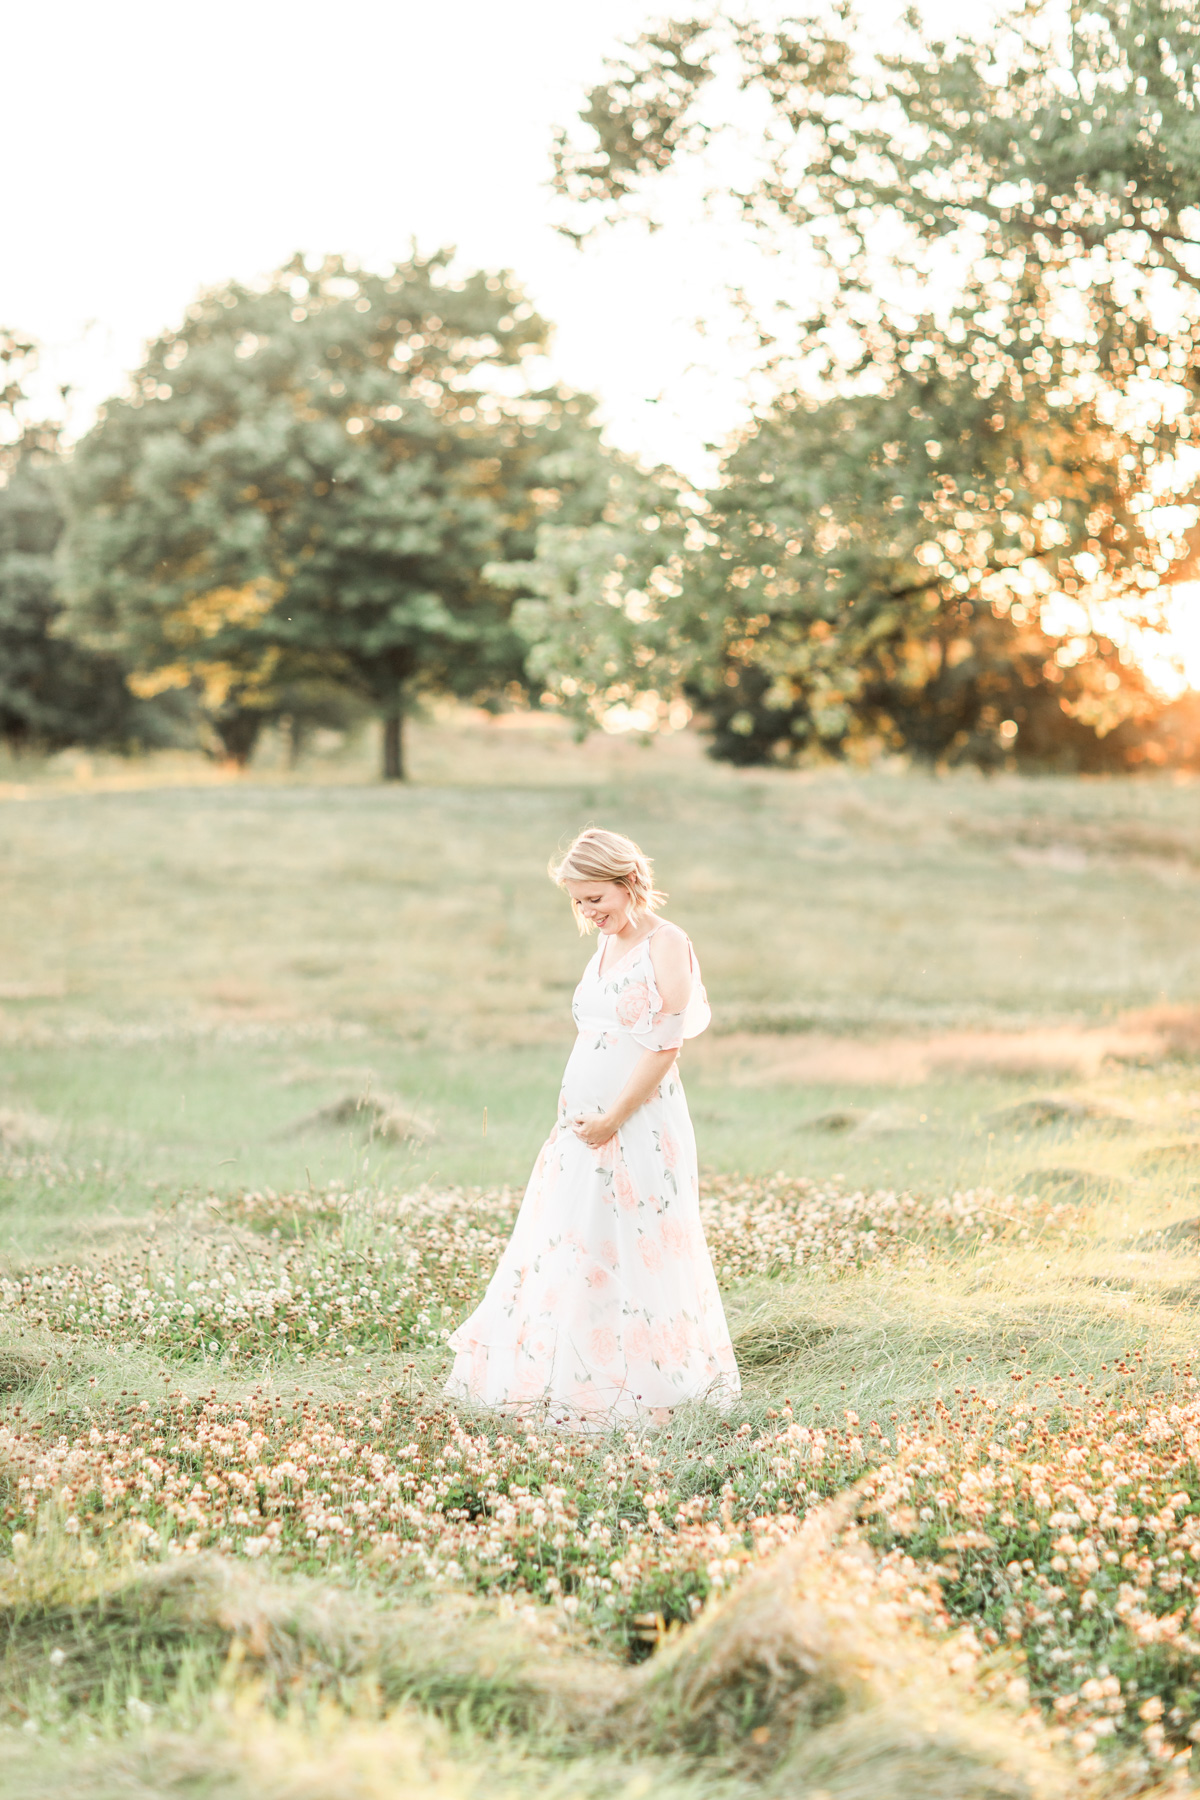 ERIN DAVISON PHOTOGRAPHY | Cleveland Maternity Photographer, Cleveland Newborn Photographers, Akron, Canton Ohio Maternity Photography, field maternity session, organic baby photography, natural light, light and airy, film maternity